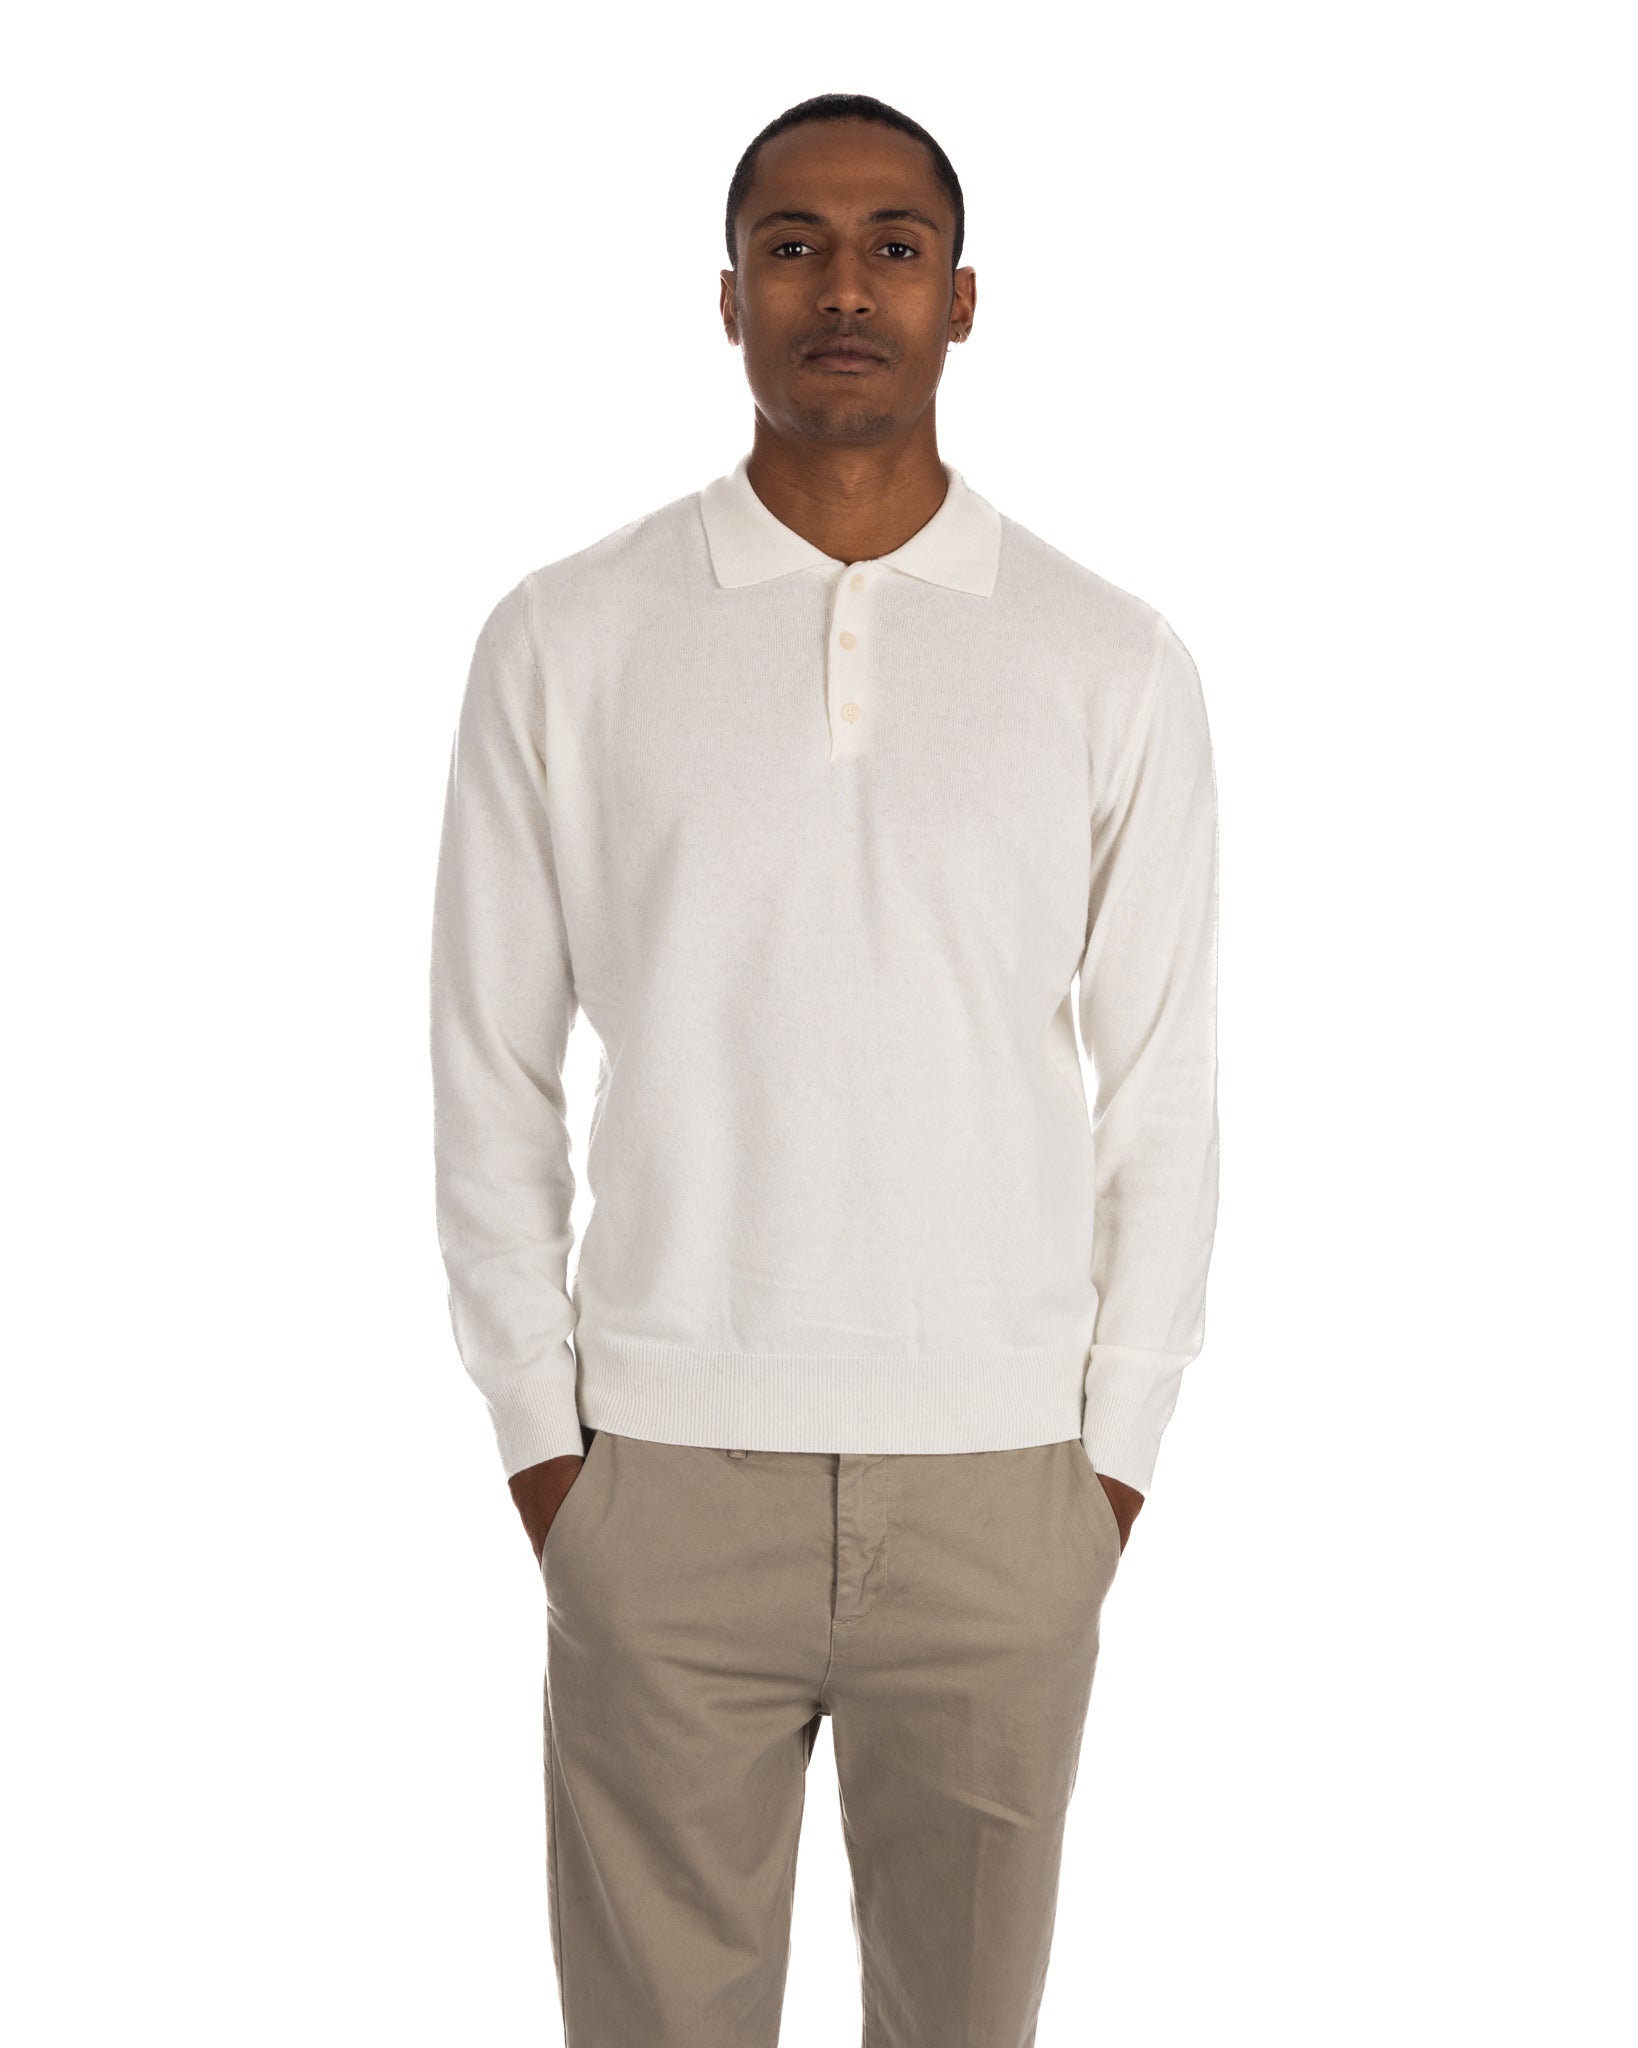 Tiger - cream polo shirt in cashmere blend